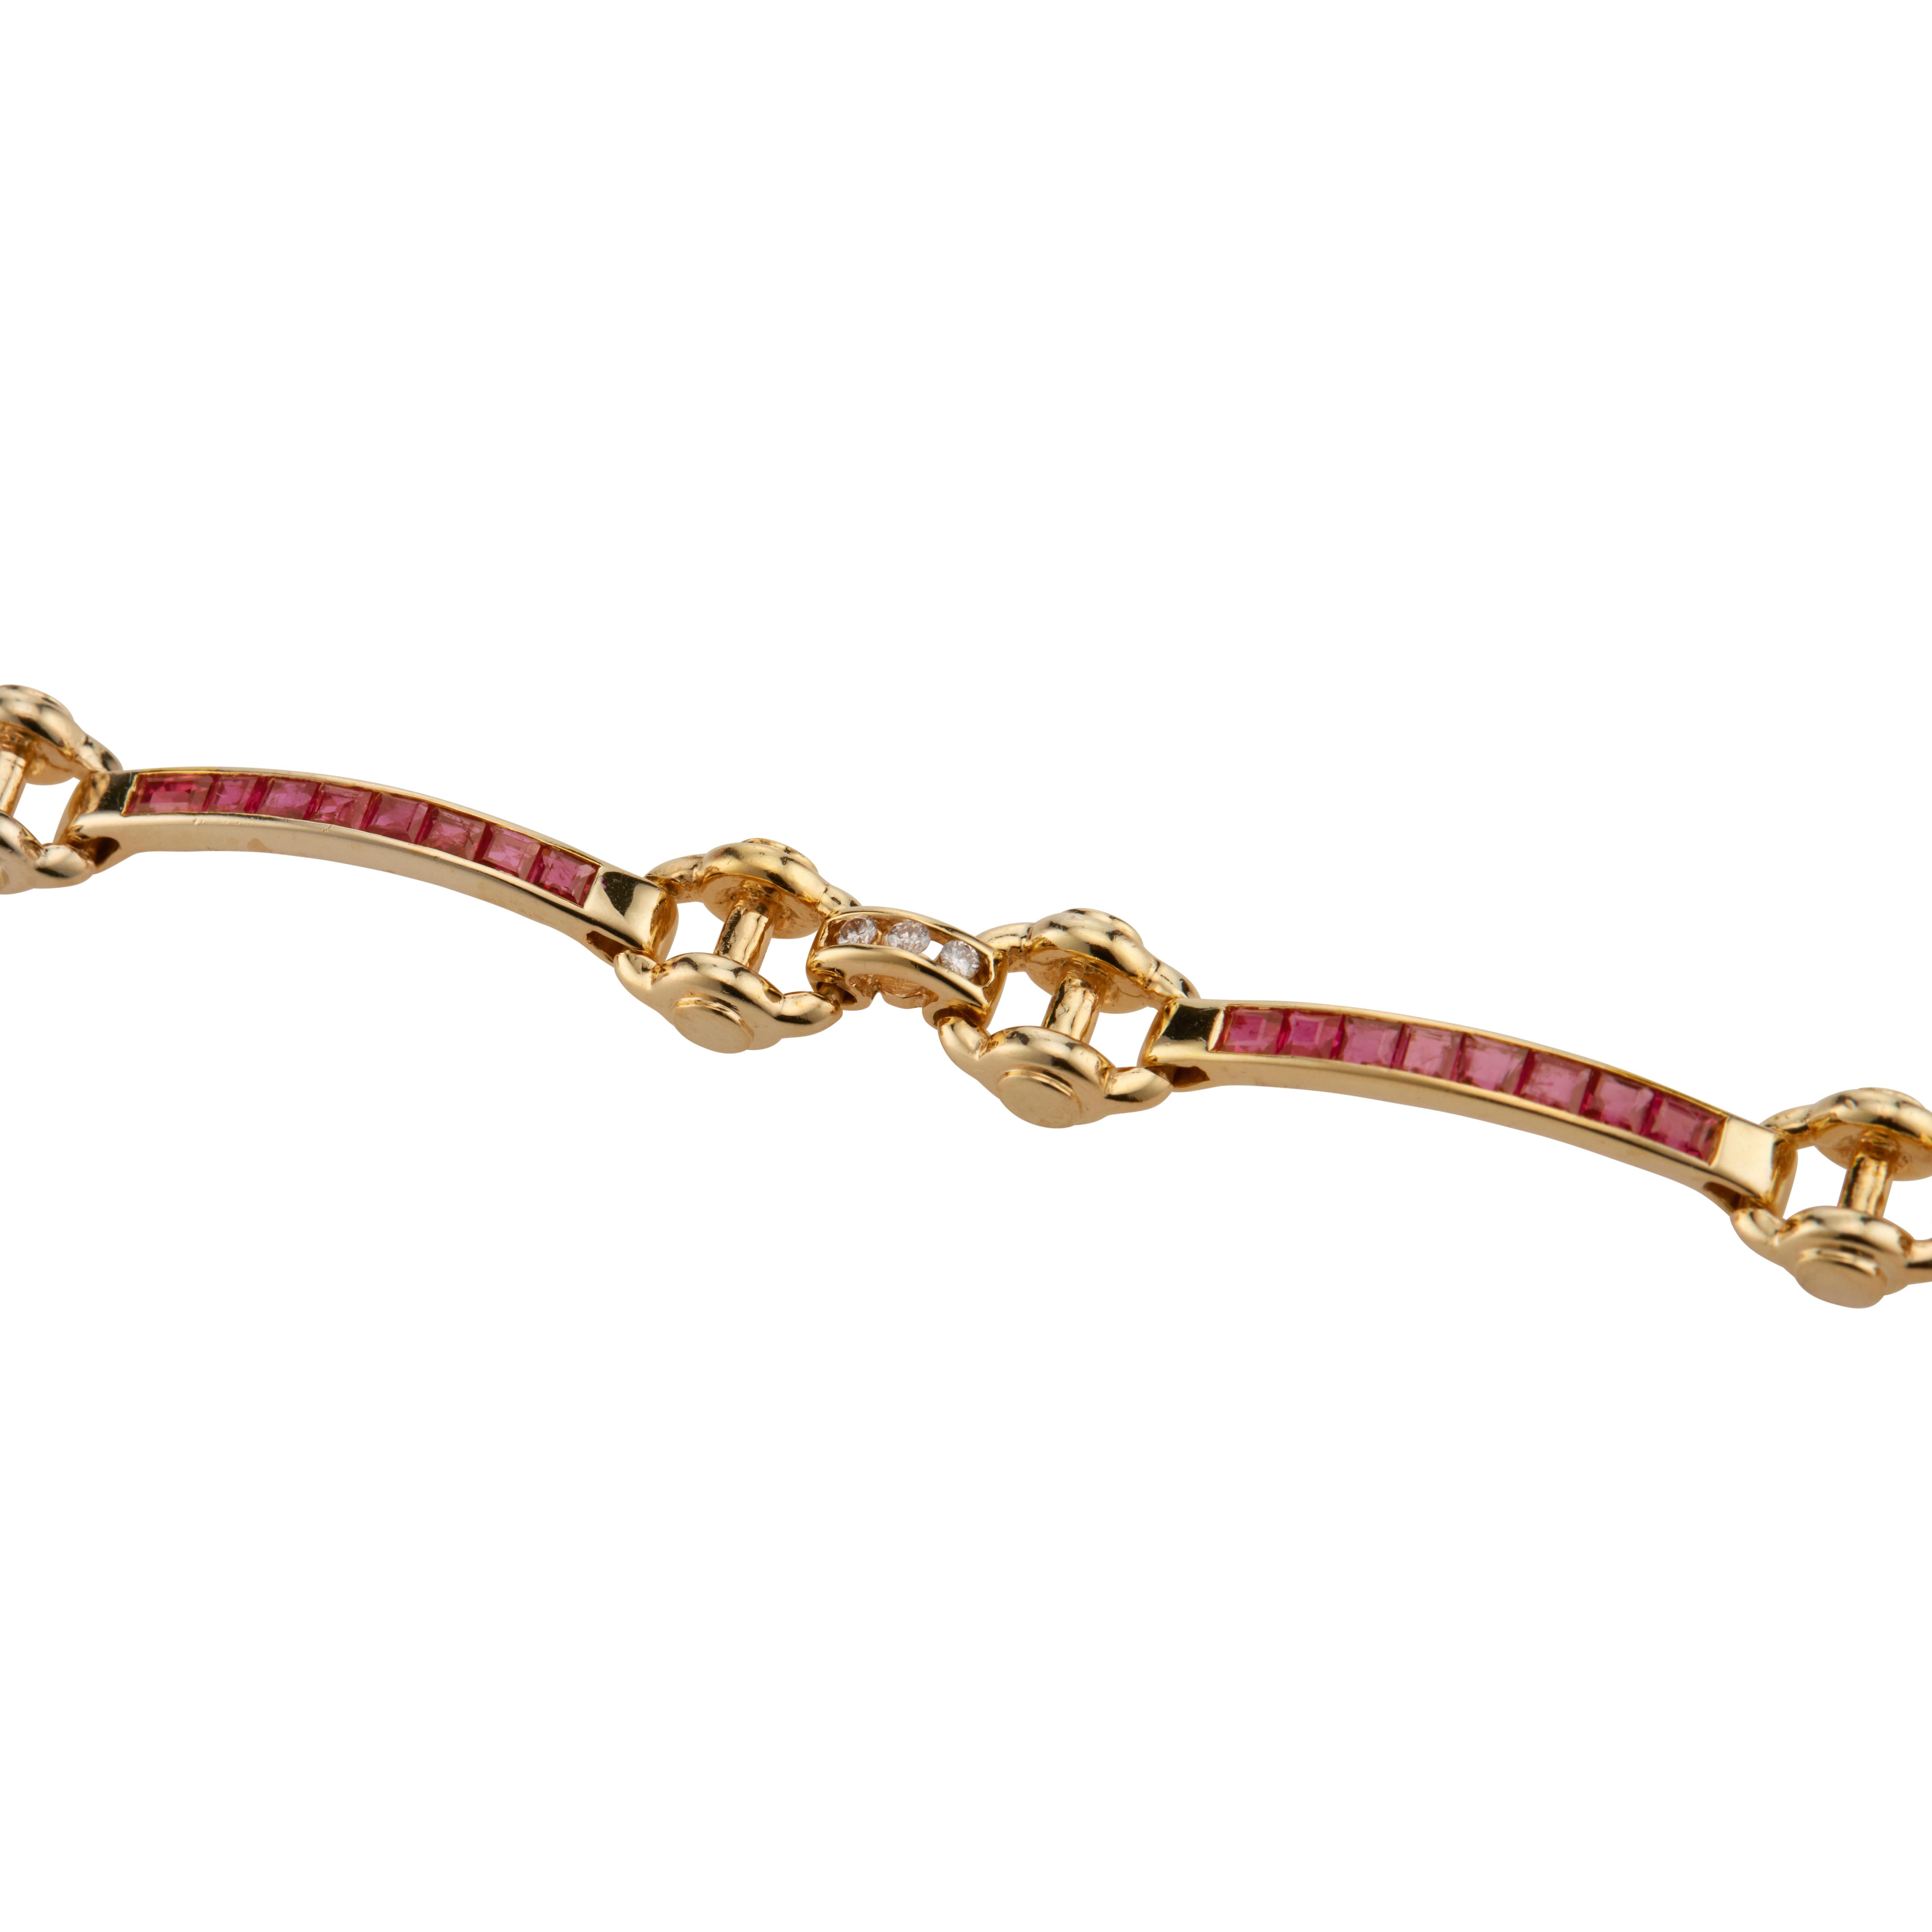 Ruby and diamond Bar, hinged link 18k yellow gold bracelet. 32 square cut rubies accented with 12 round diamonds. 6.75 inches.

32 square cut red Rubies 1.28 carat. 2mm, SI
12 round diamonds, approx. total weight .12cts
18k yellow gold
Tested and